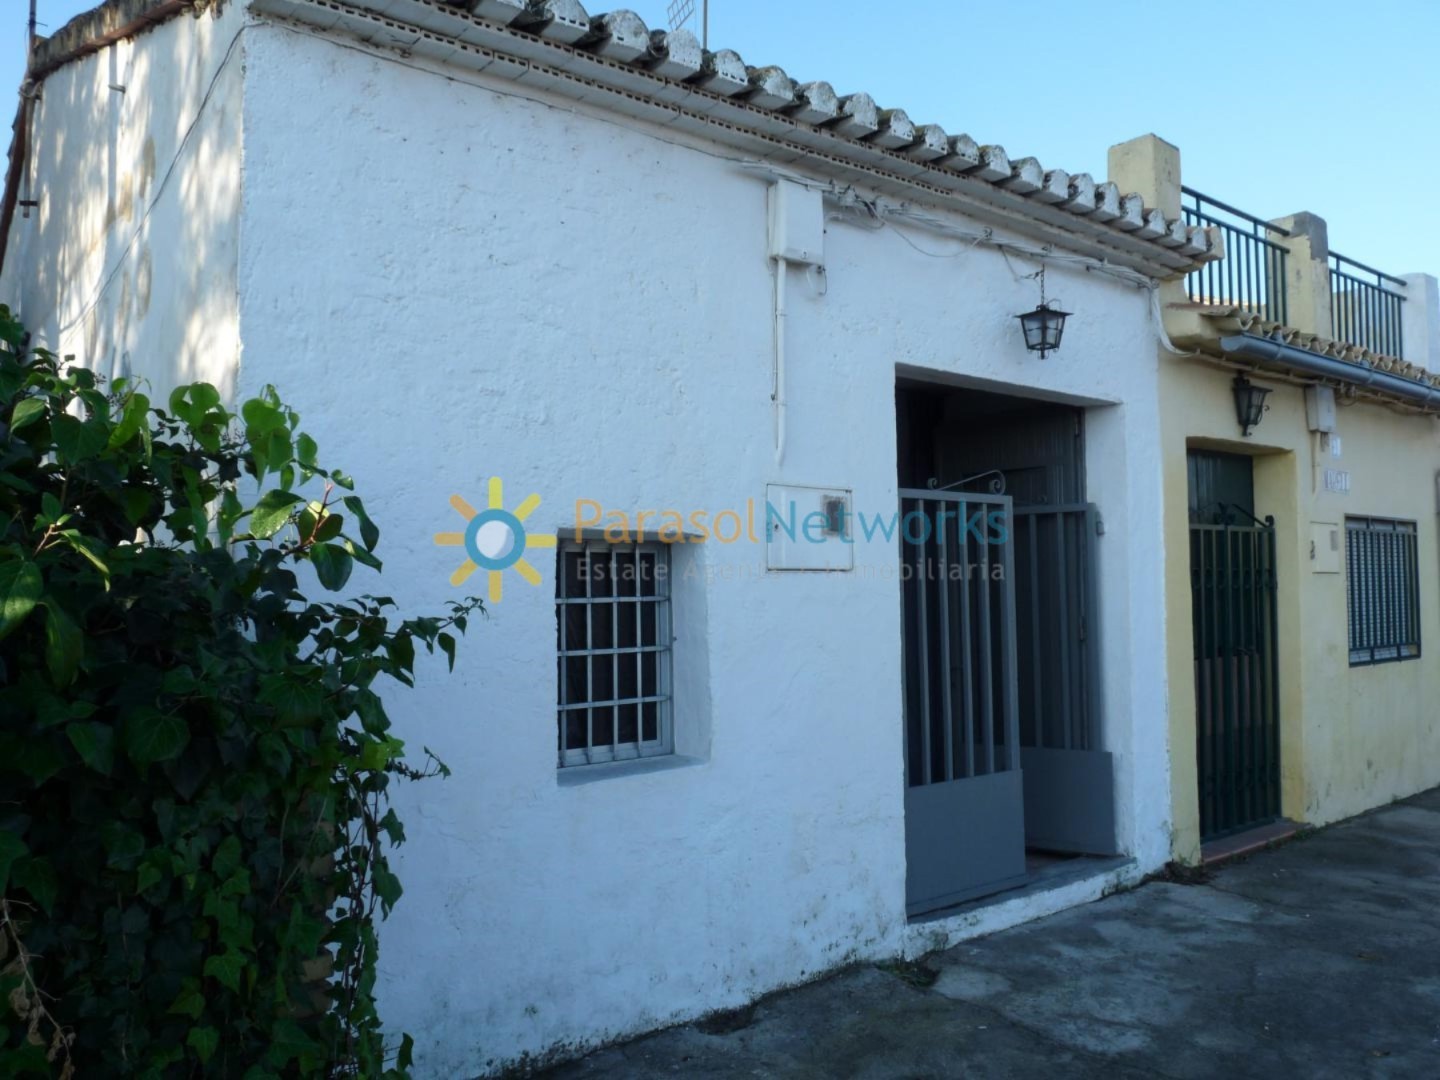 House for sale in Oliva- Ref:1975